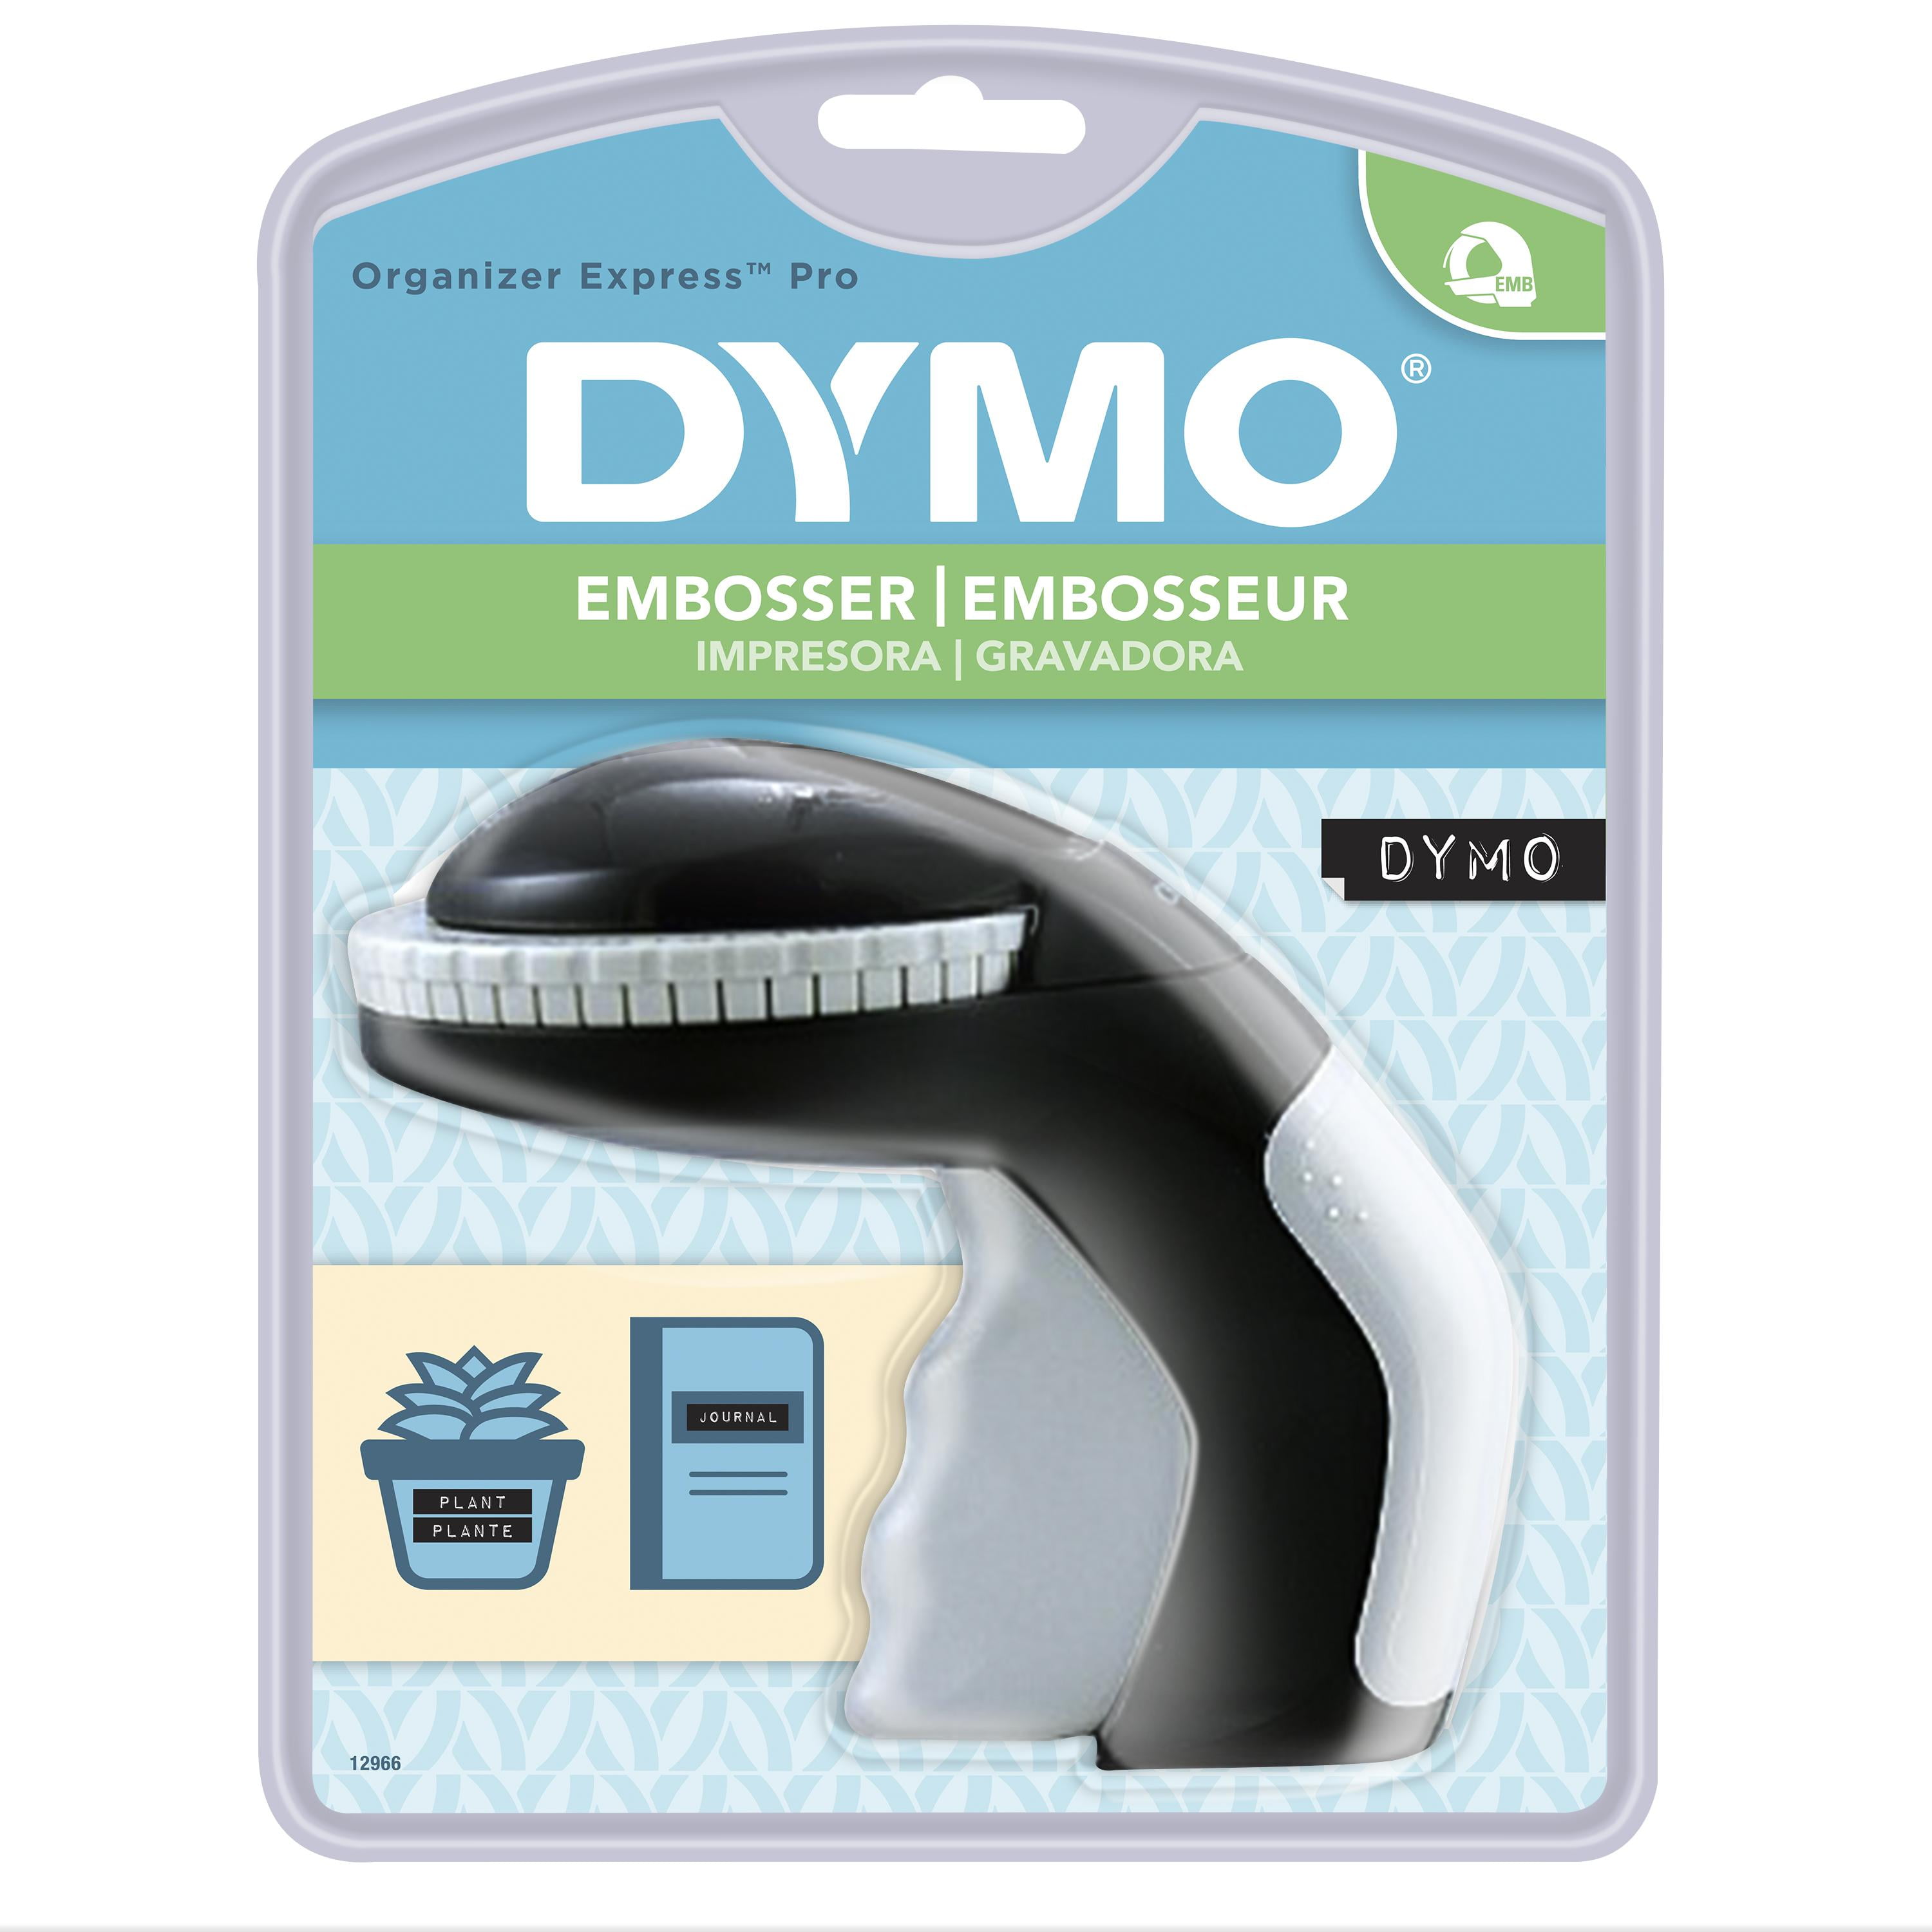 Details about   5PK For DYMO 3D Embossing Label Tape Organizer Xpress 520109 White on Black 9mm 